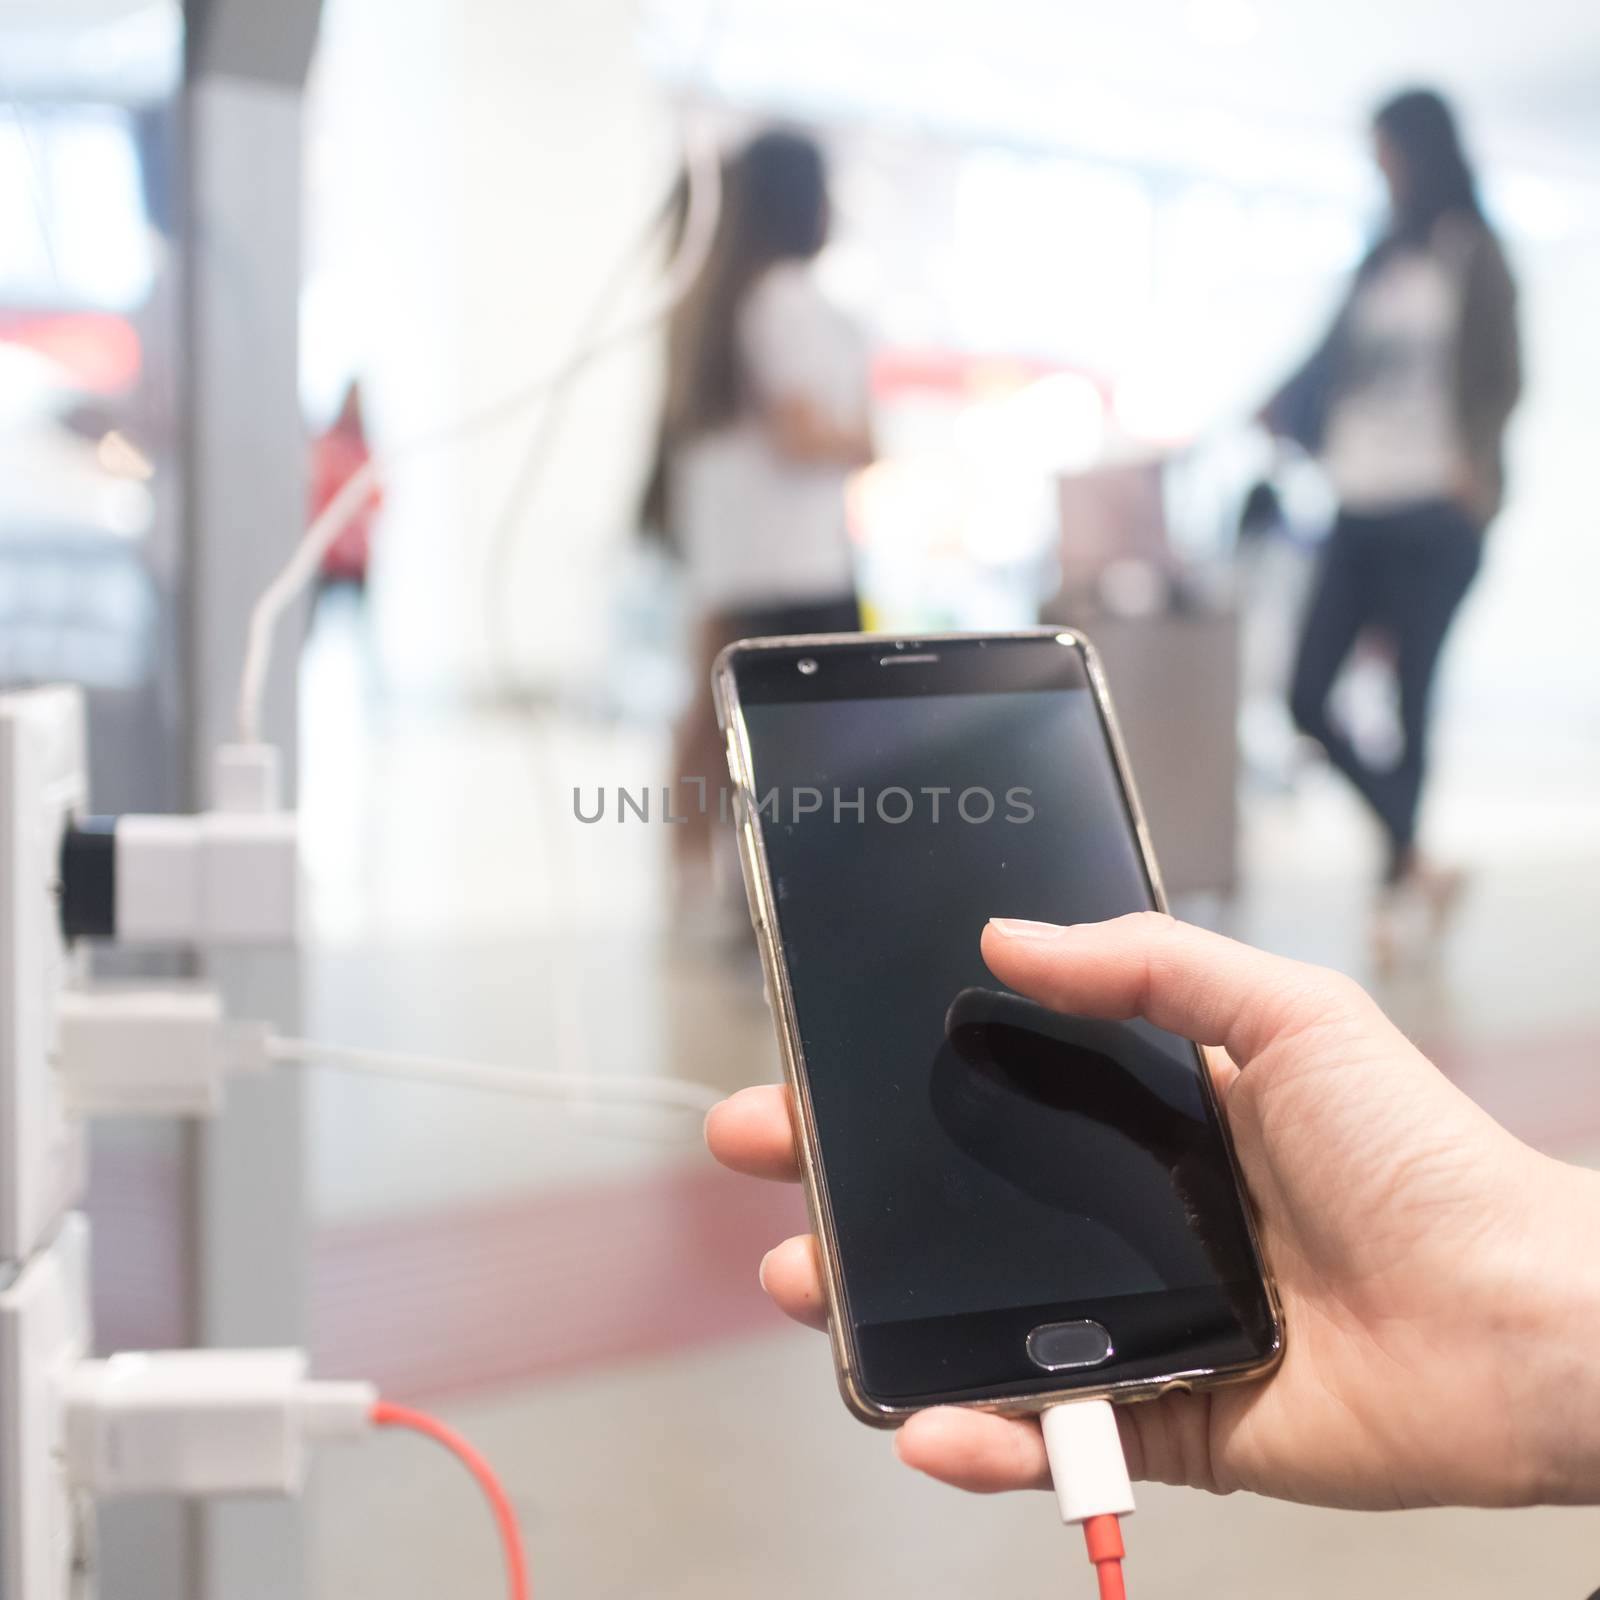 Female hands holding and using smartphone while charging it in a public place using electric plug and a charging cable.